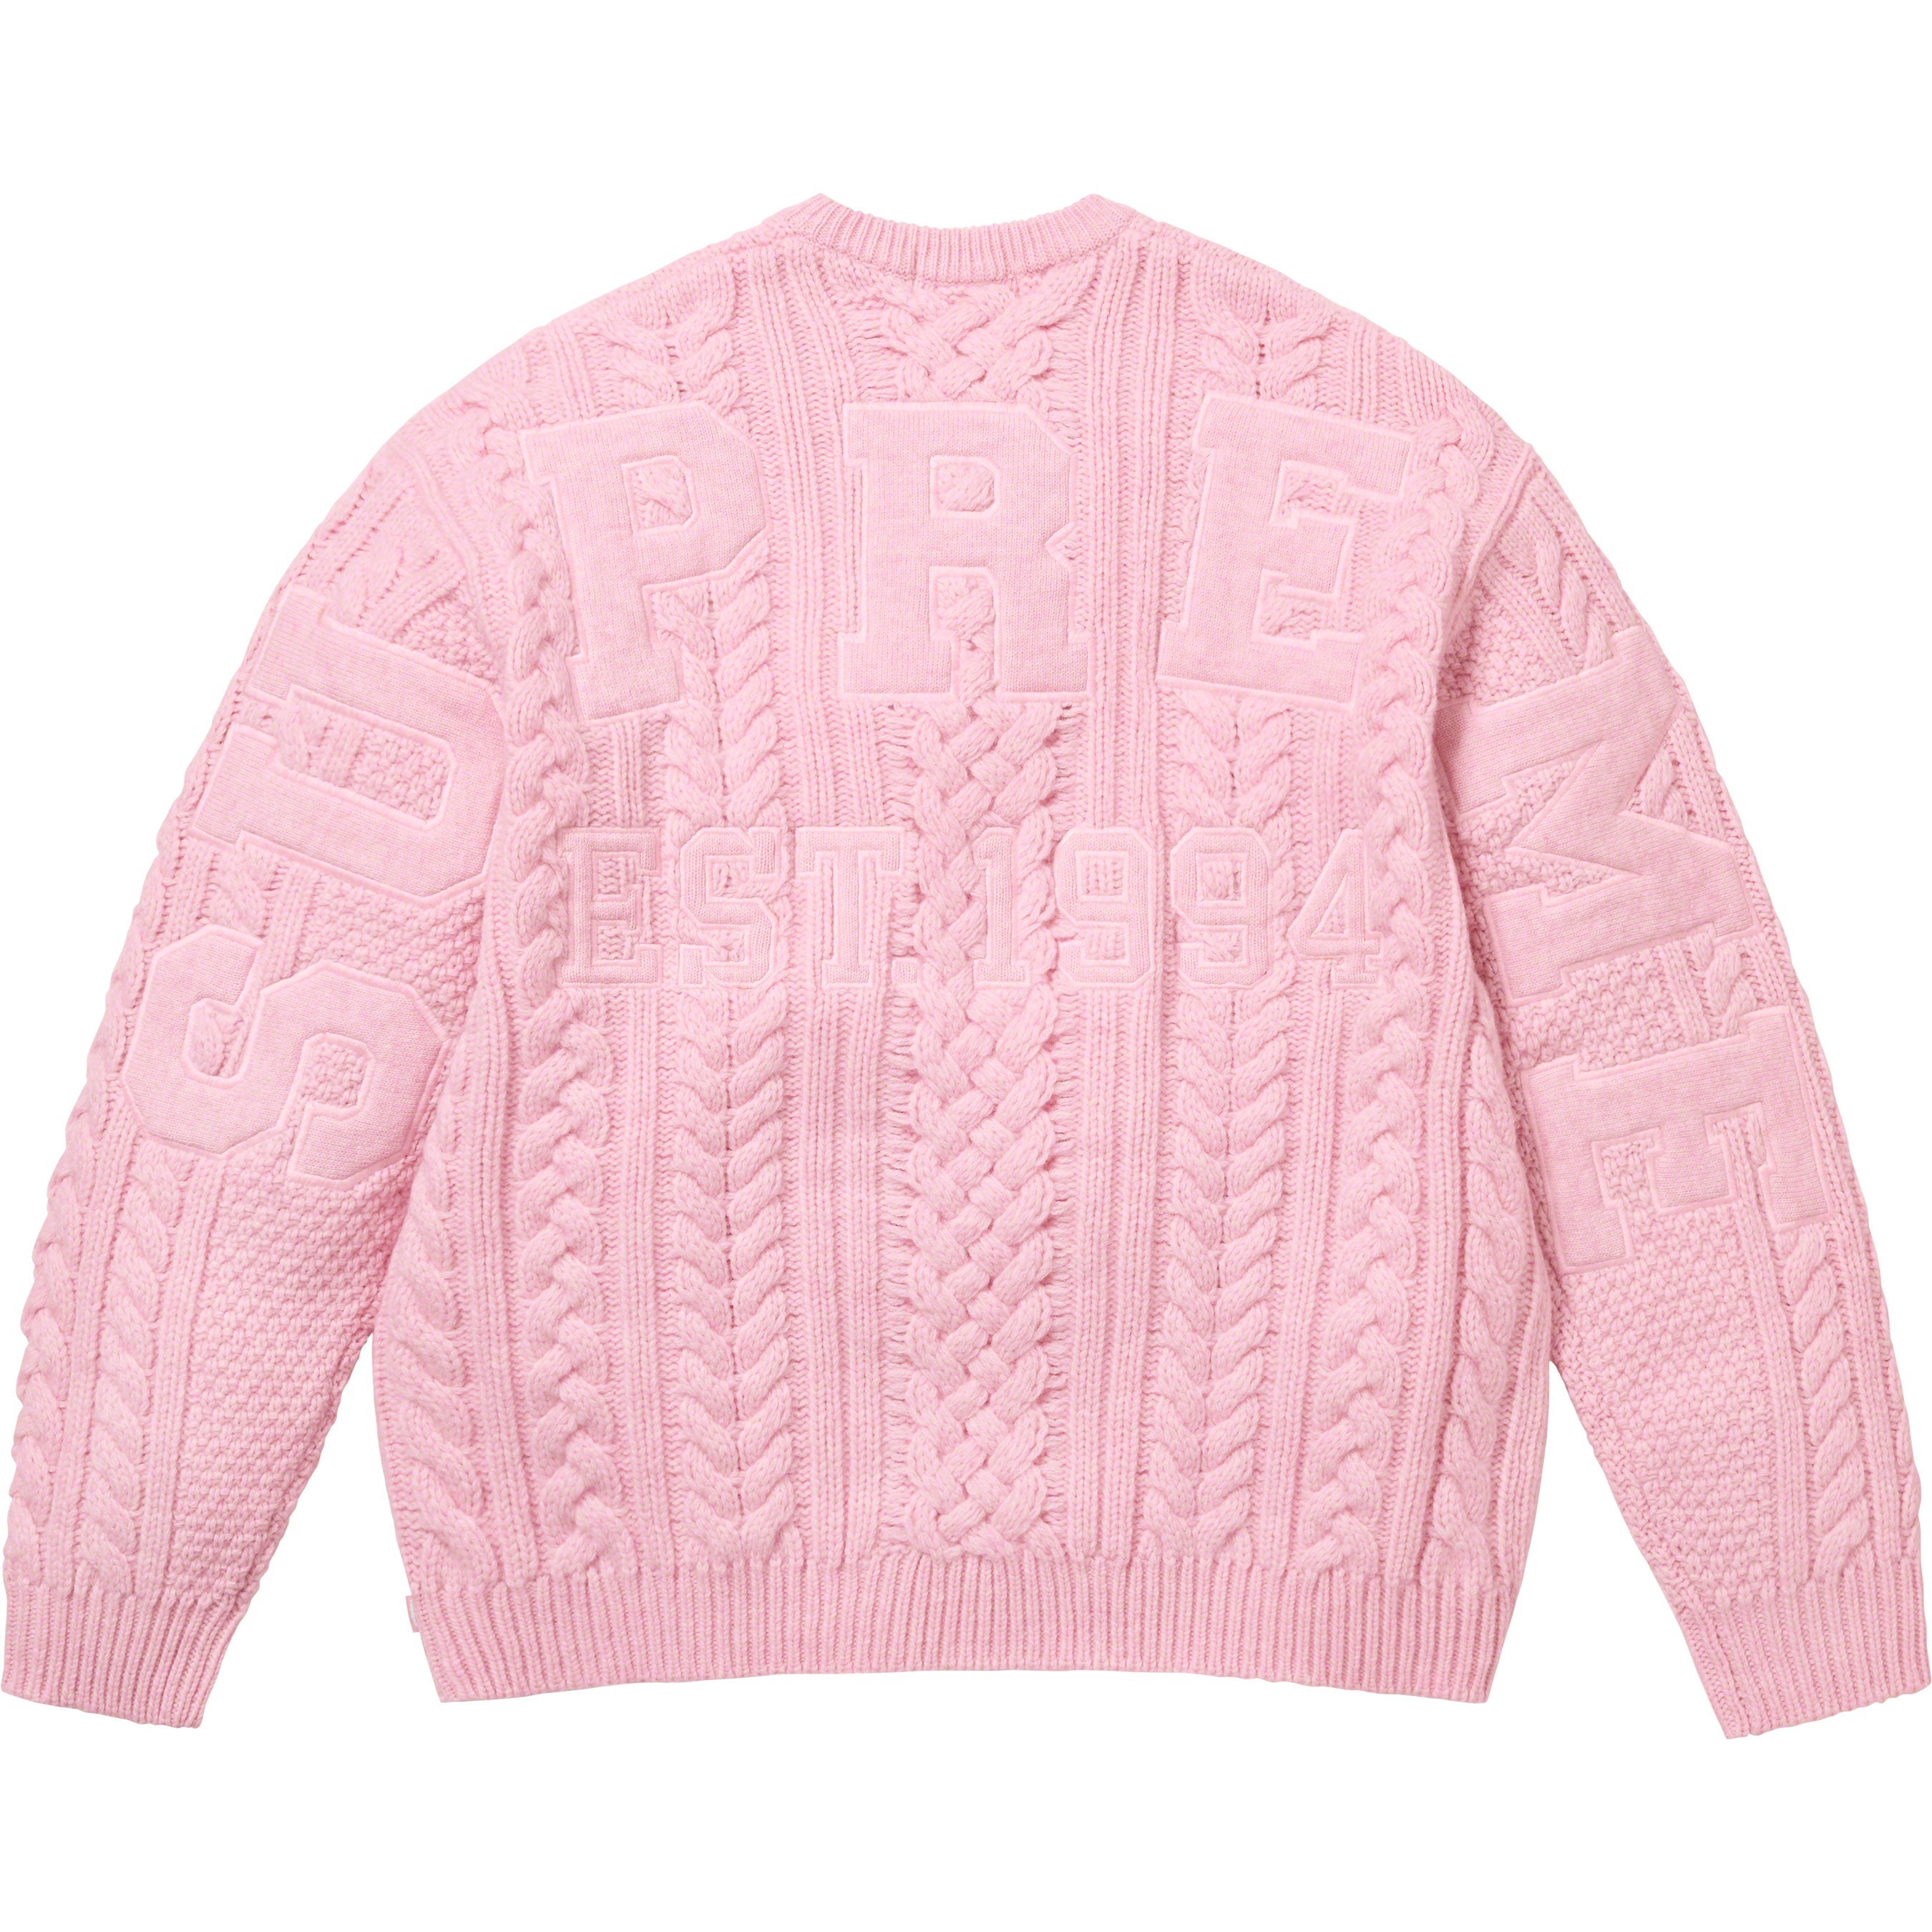 Supreme Applique Cable Knit Sweater写真を見ての通り